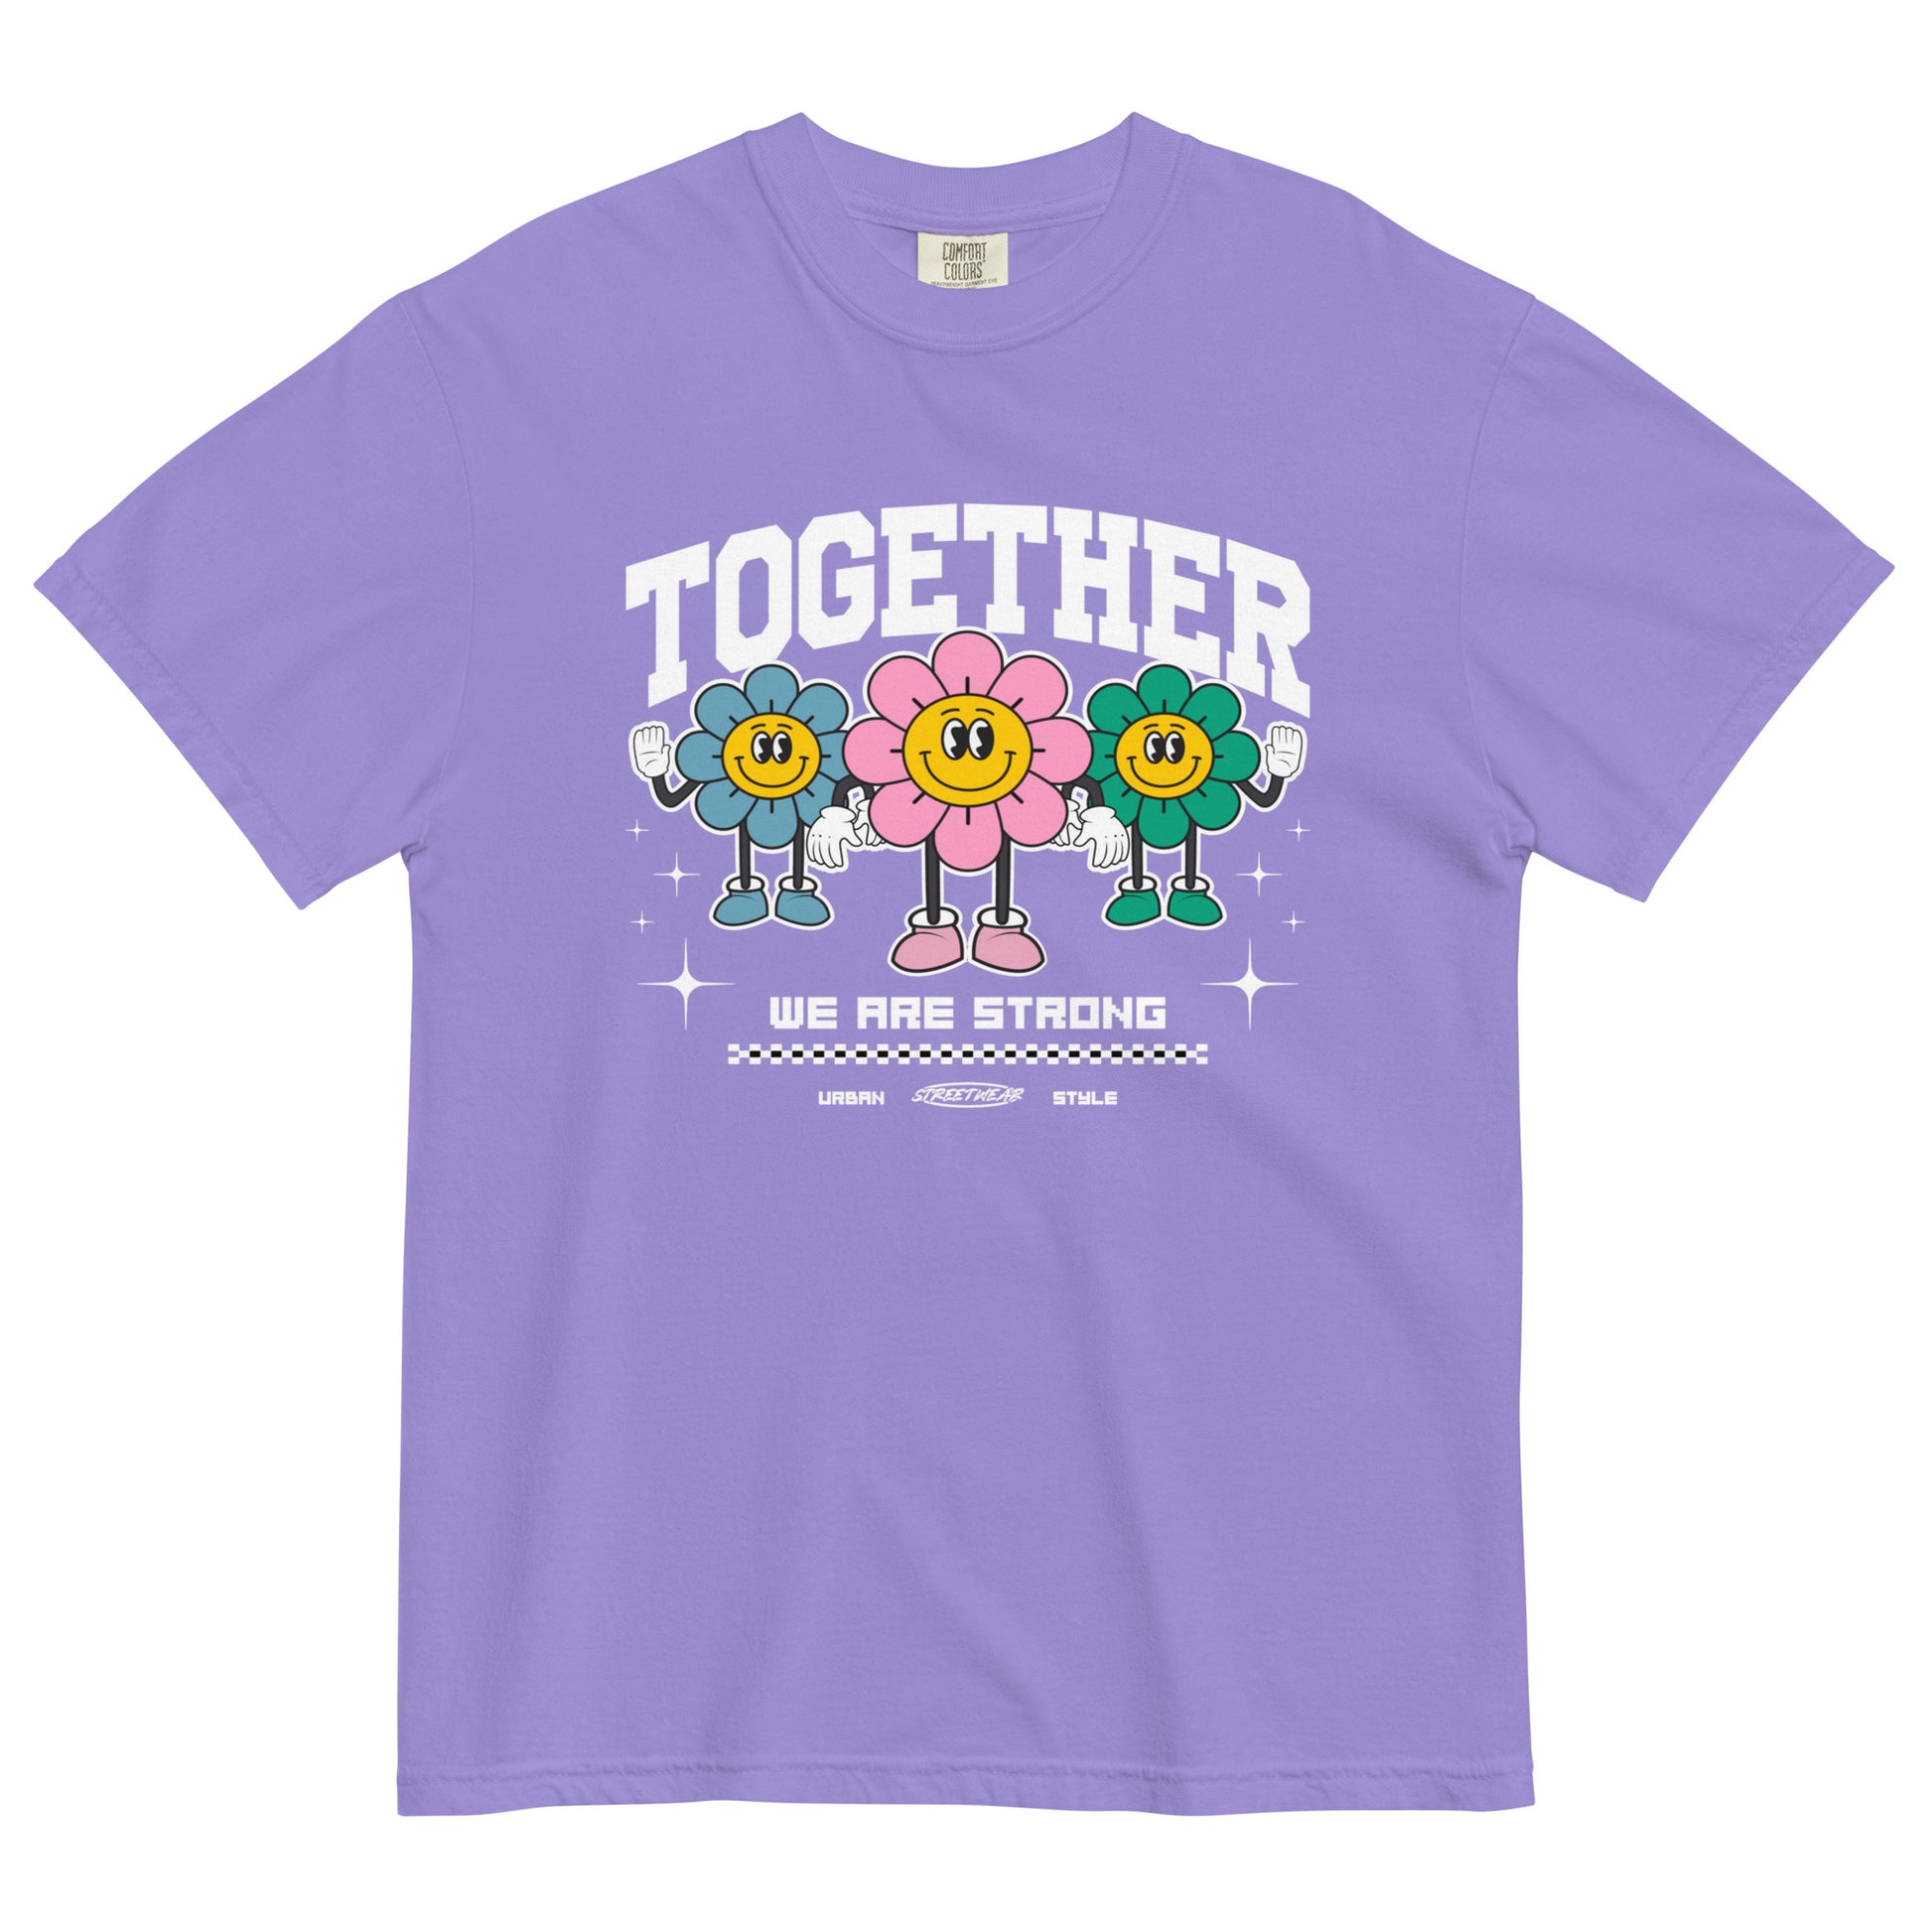 t-shirt-from-the-front-with-flowers-symbol